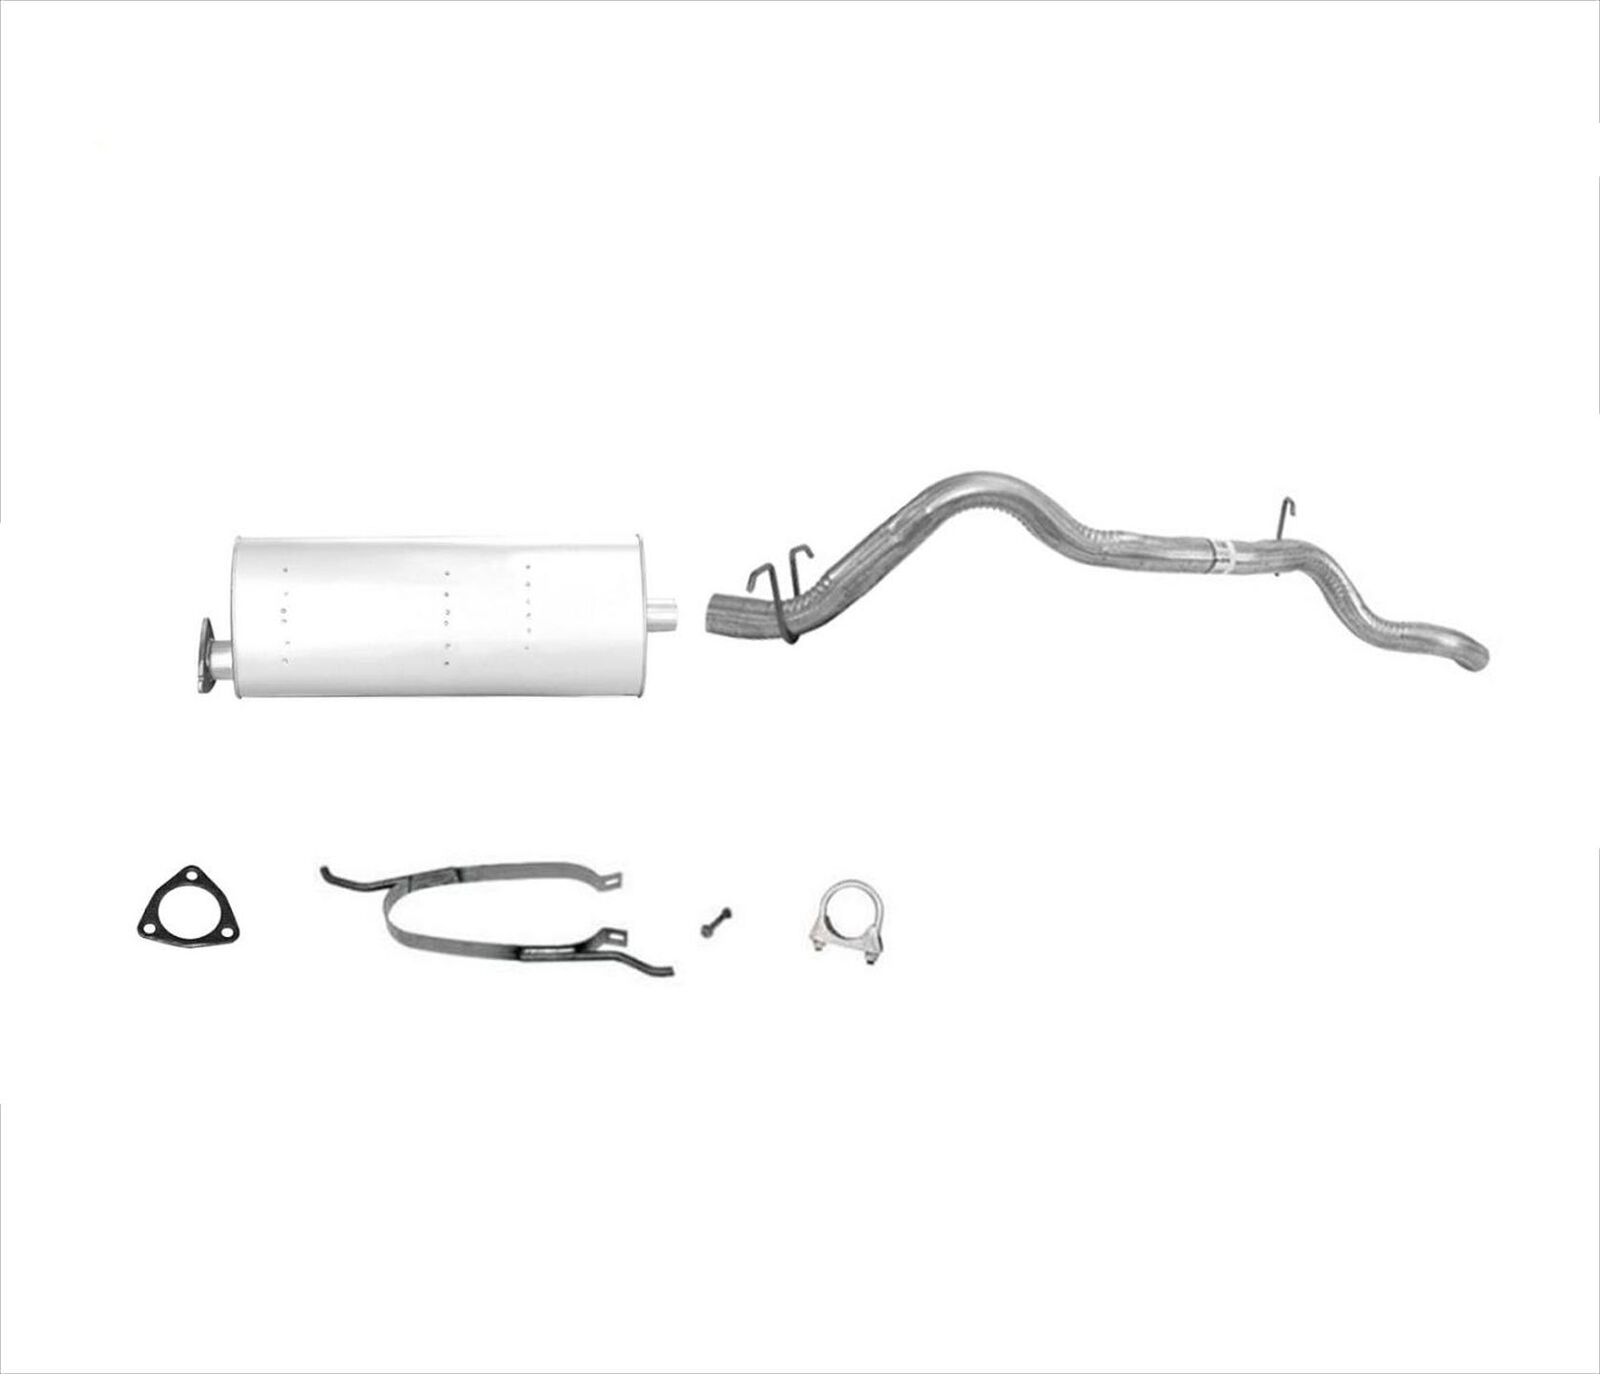 Fits For 1995-1999 GM 4.3L Blazer 4 Door SUV Exhaust System Muffler Tail Pipe